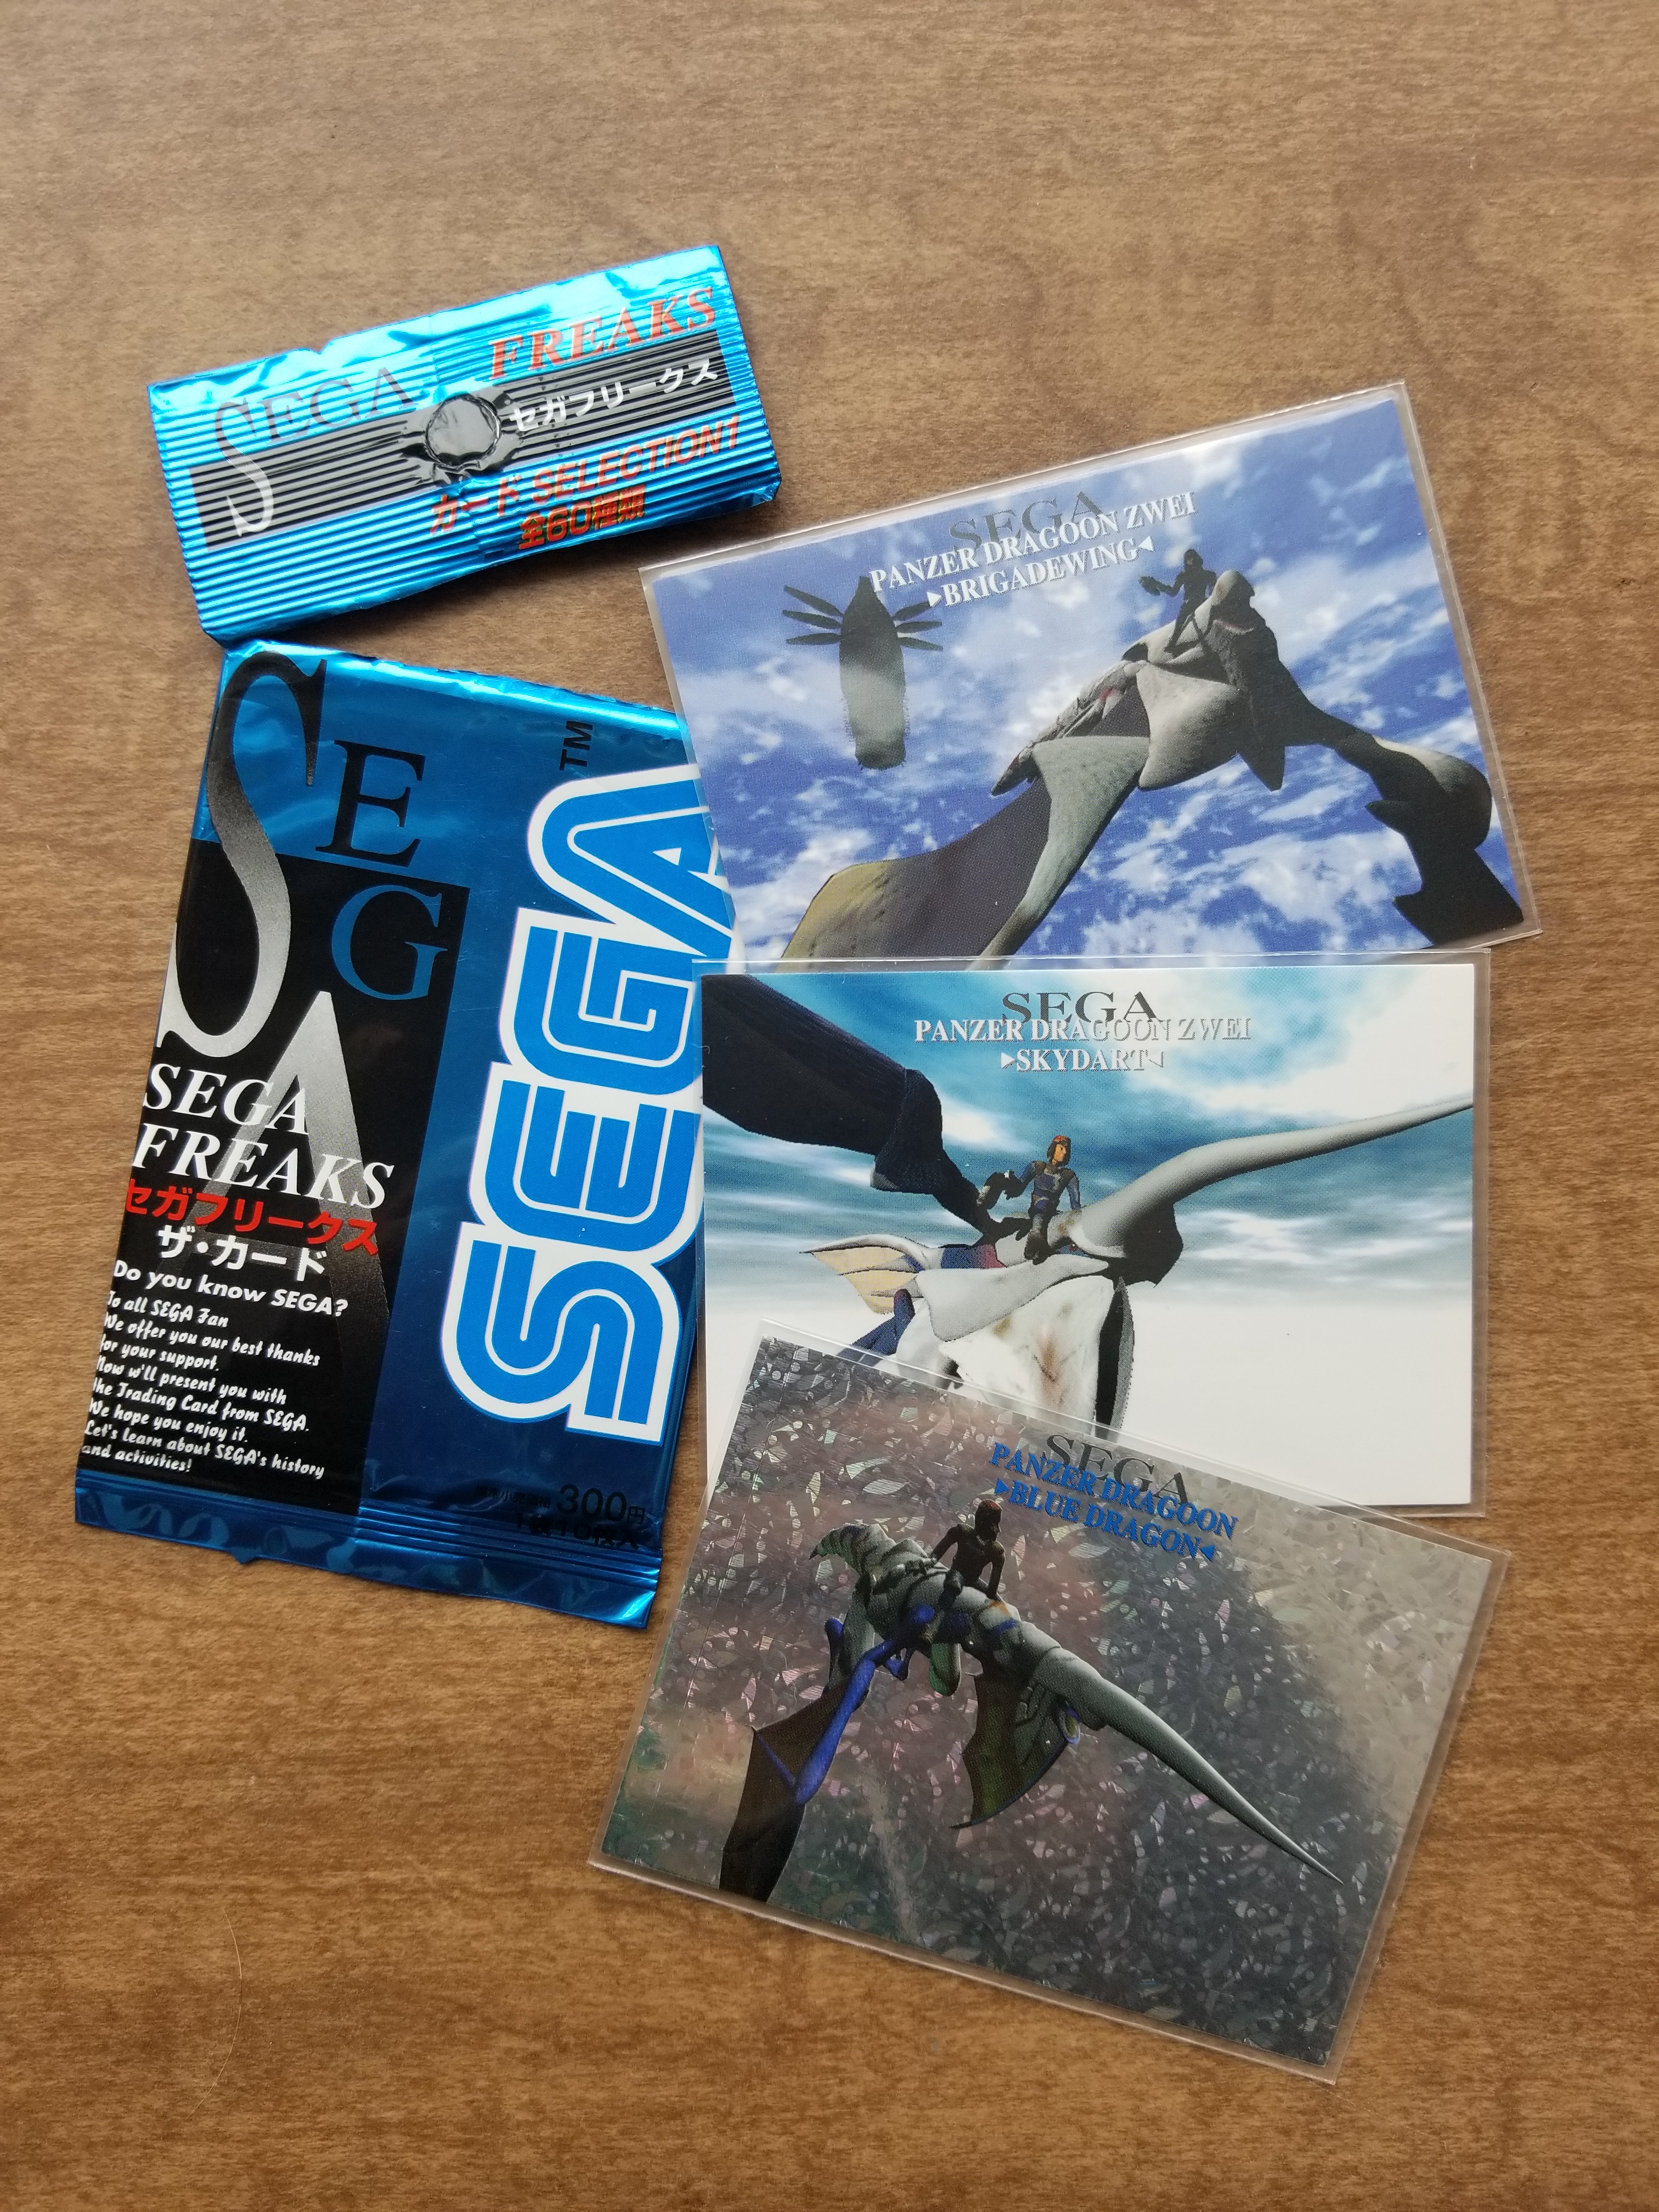 SEGAFREAKS Collectible Trading Cards